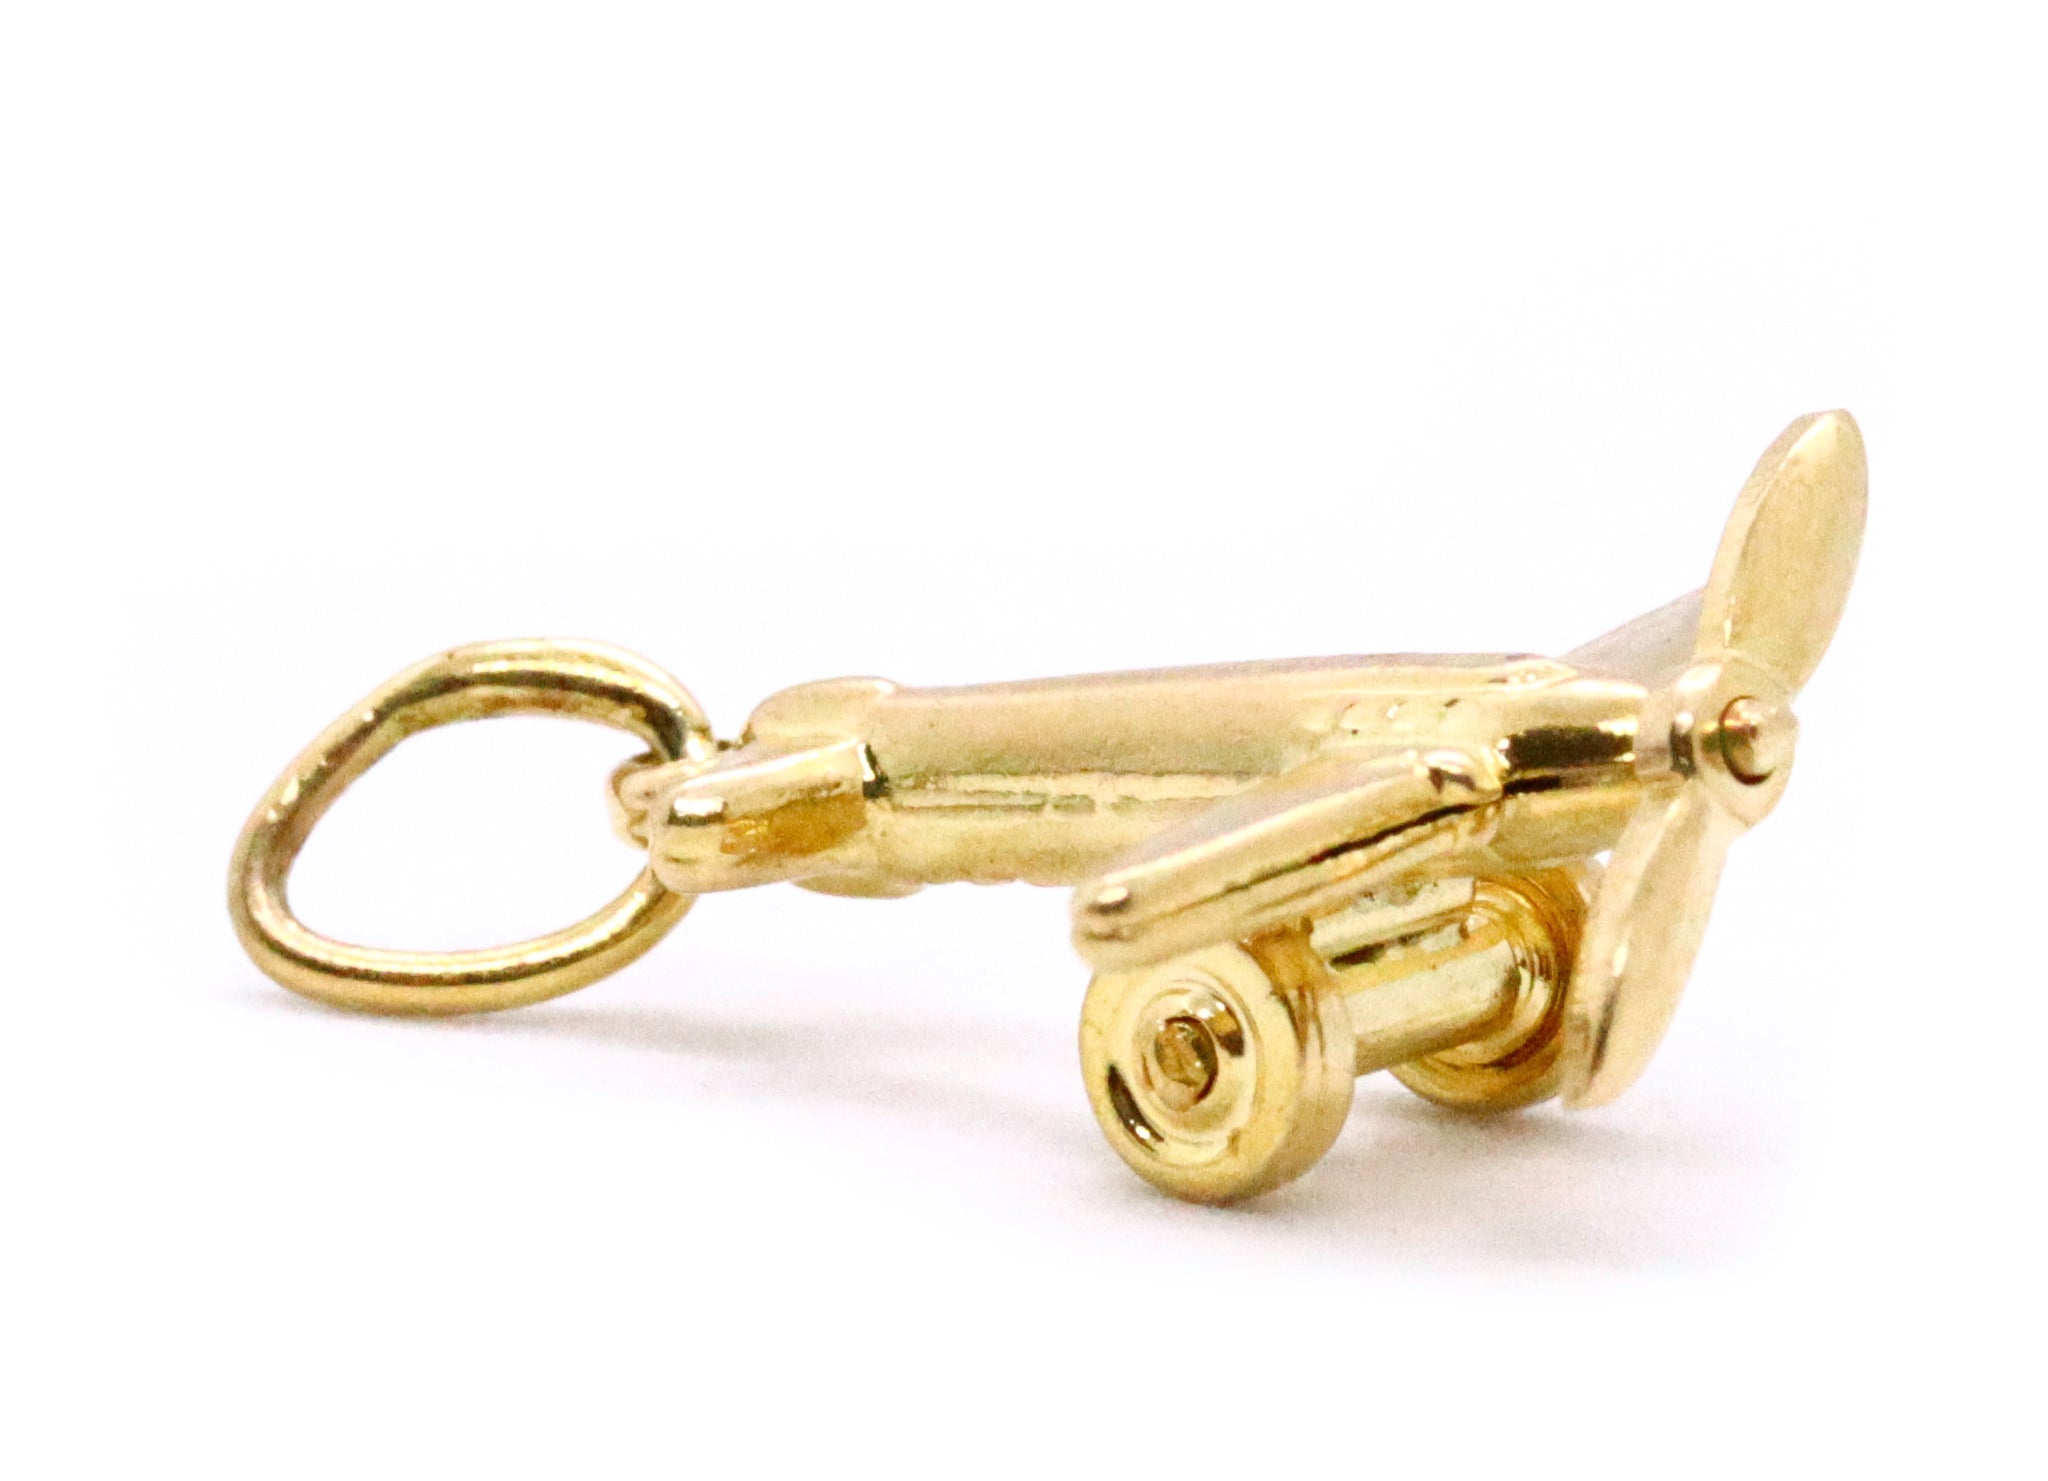 CUTE 14 KT GOLD CHARM PENDANT OF AN AIRPLANE